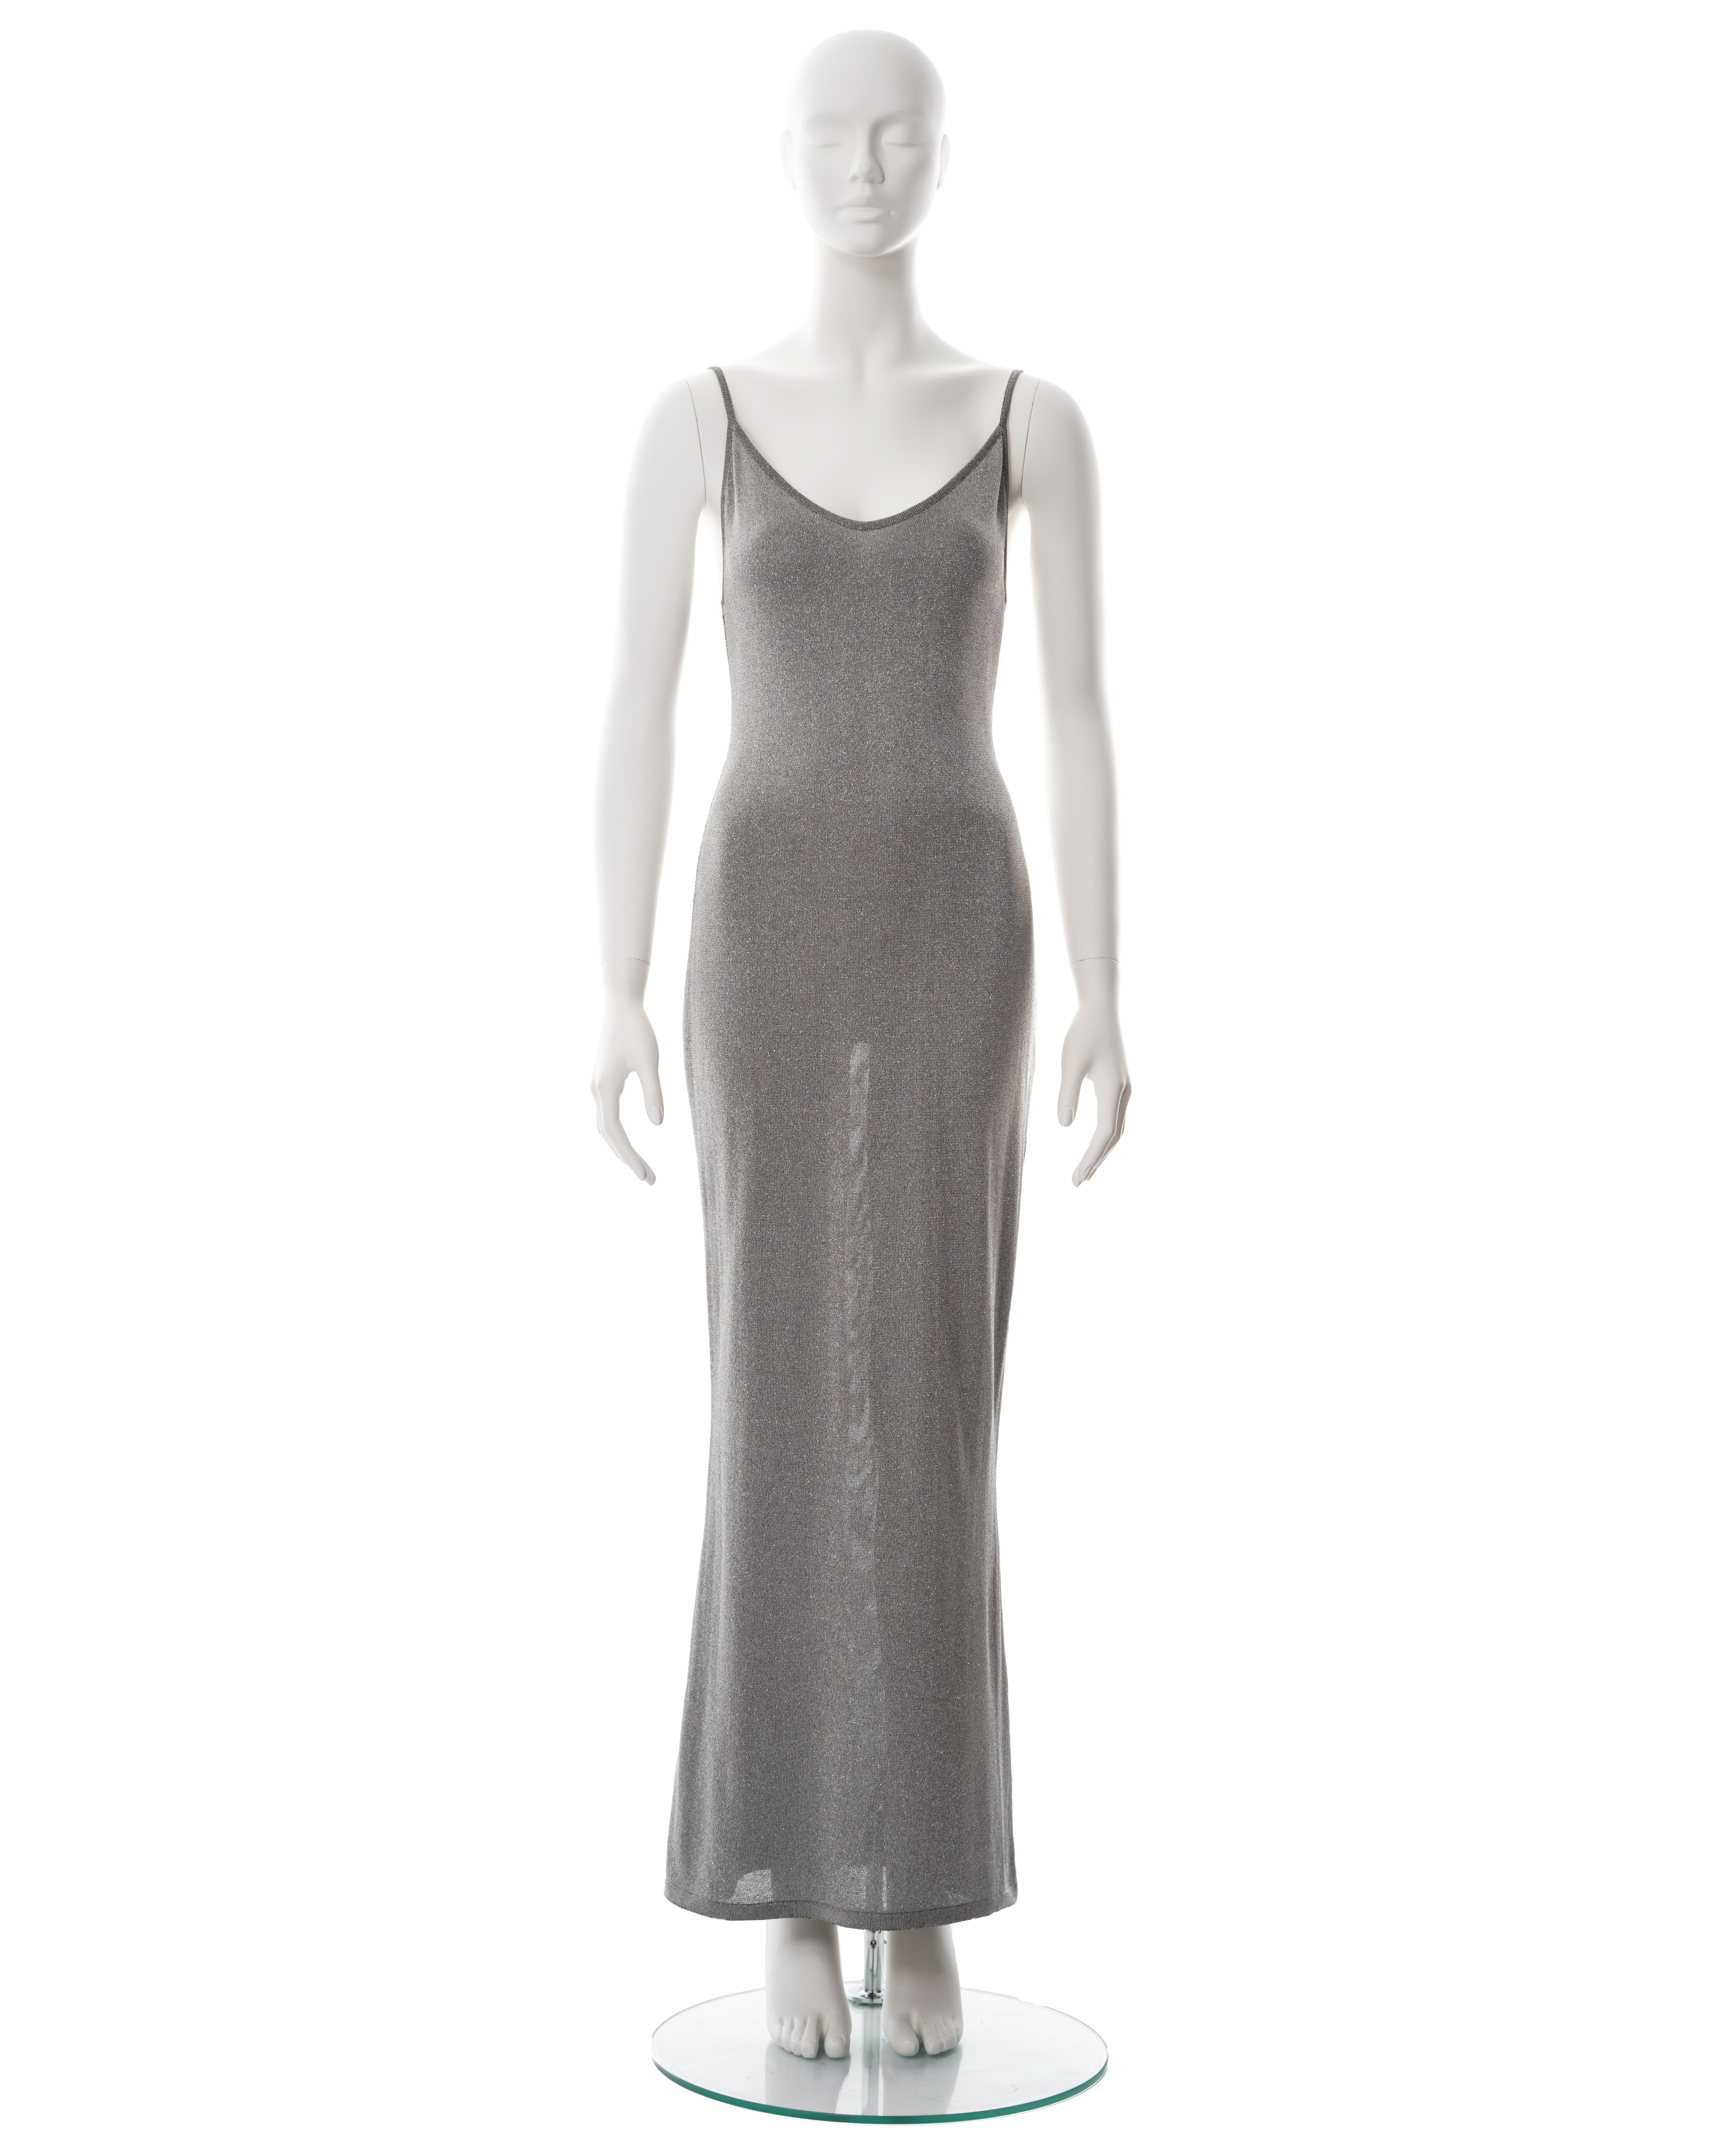 ▪ Christian Dior silver knitted lurex evening slip dress
▪ Designed by John Galliano
▪ Sold by One of a Kind Archive
▪ Fall-Winter 1998
▪ Figure-hugging fit 
▪ Scoop neck
▪ Spaghetti straps 
▪ Slip-on with no closures 
▪ Size: Medium
▪ Made in